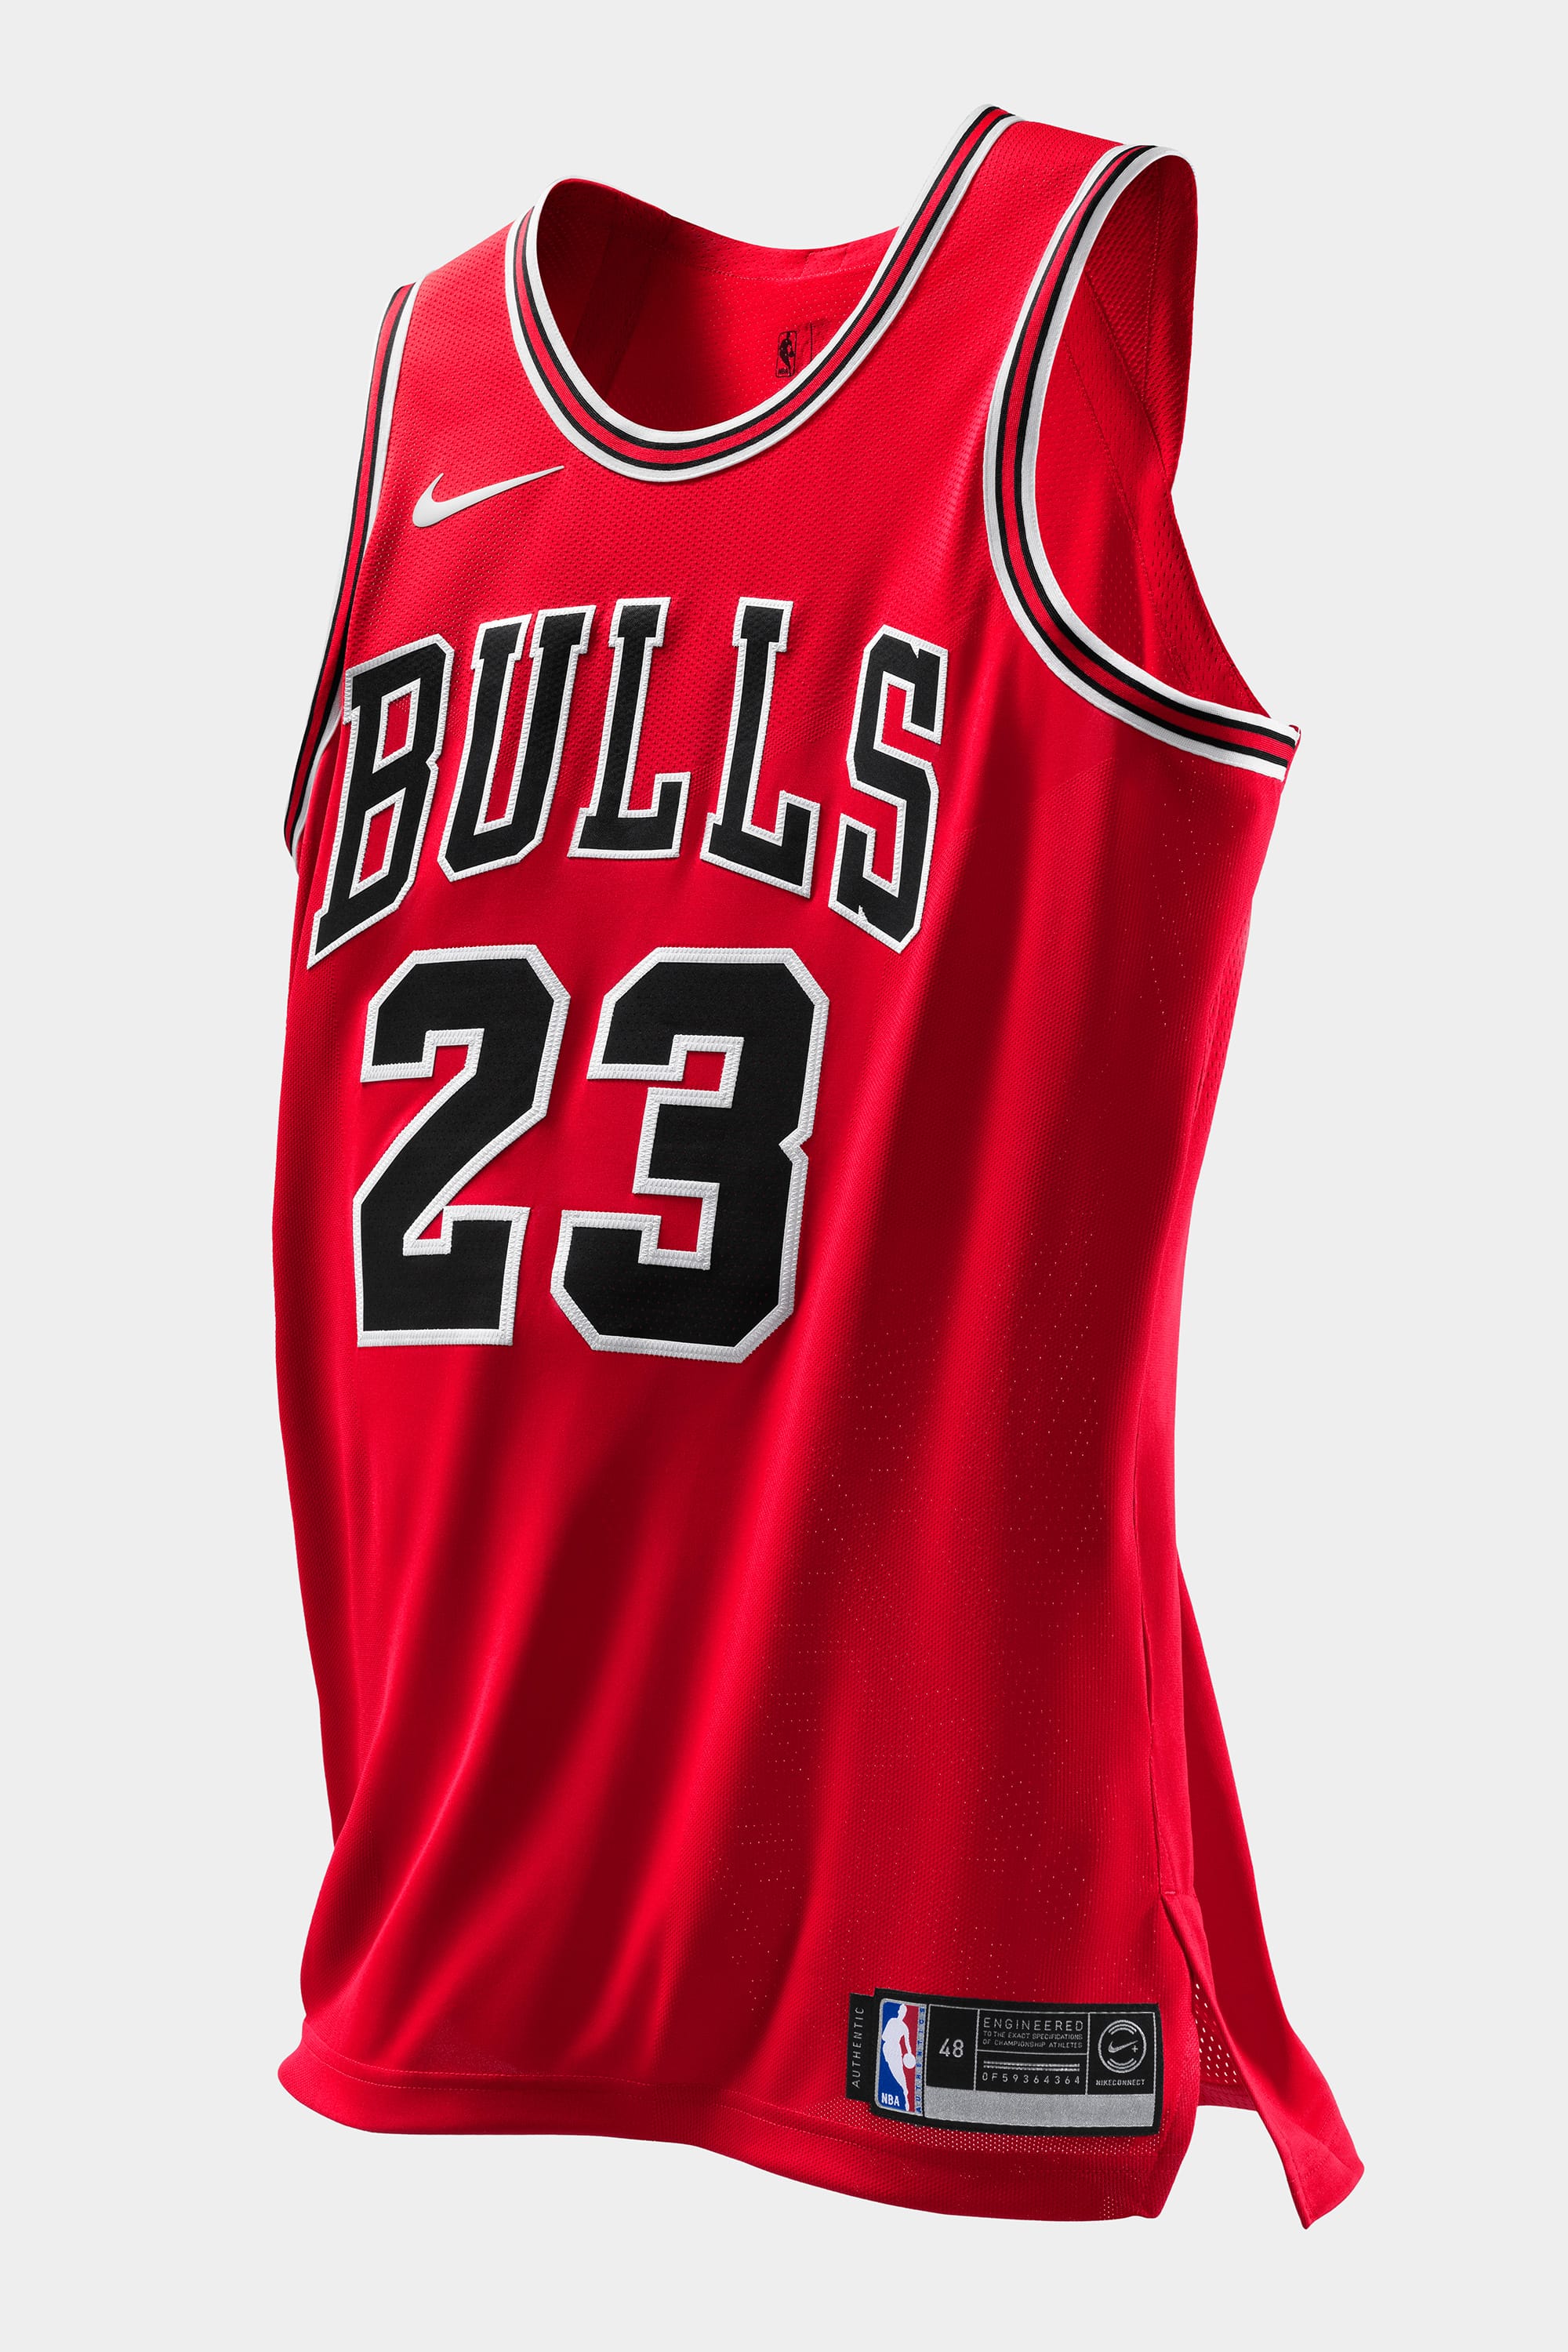 Nike Revamps MJs Bulls Jersey for The 